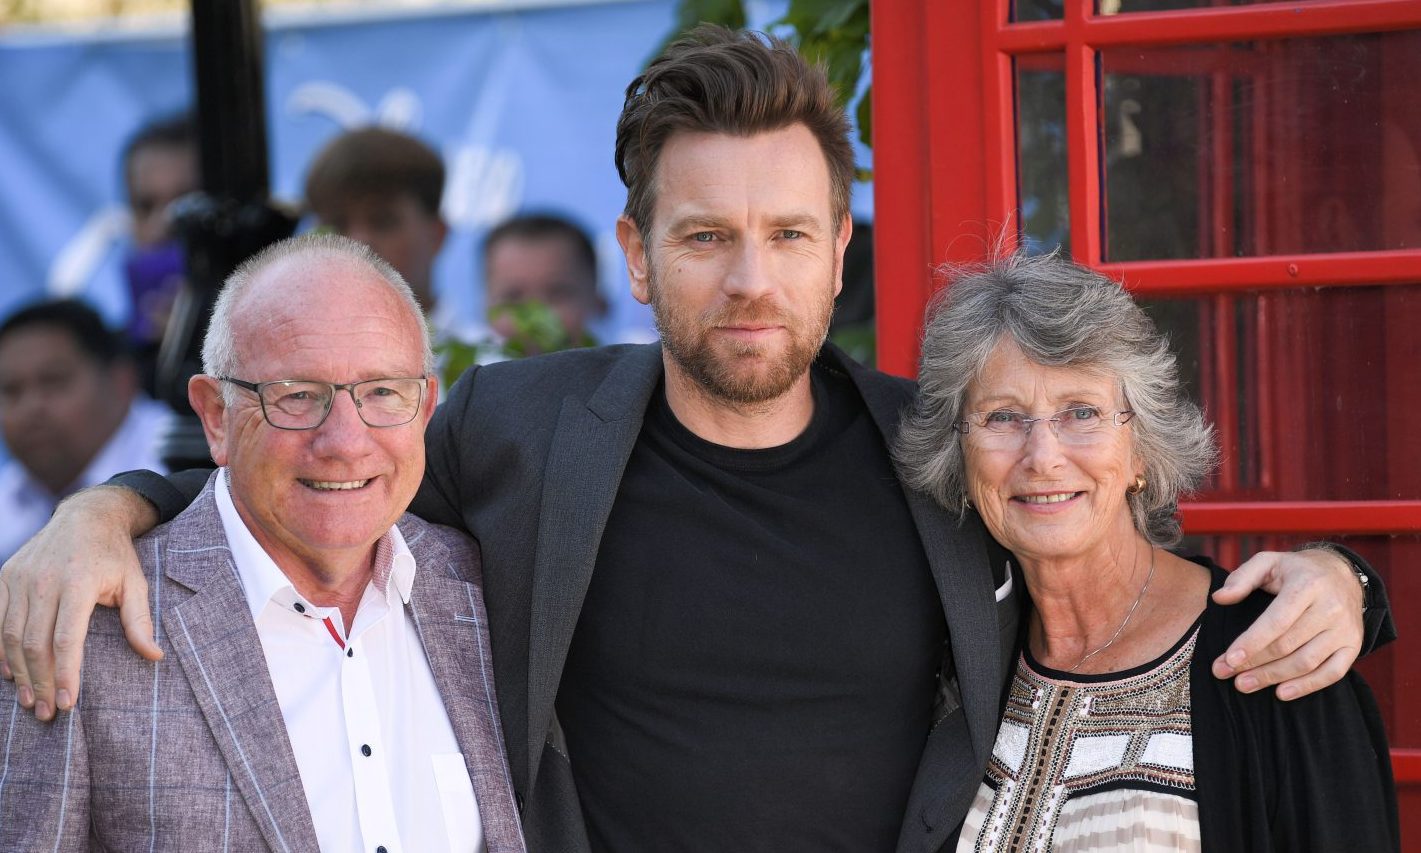 Ewan McGregor with parents Jim and Carol on a red carpet at a film screening